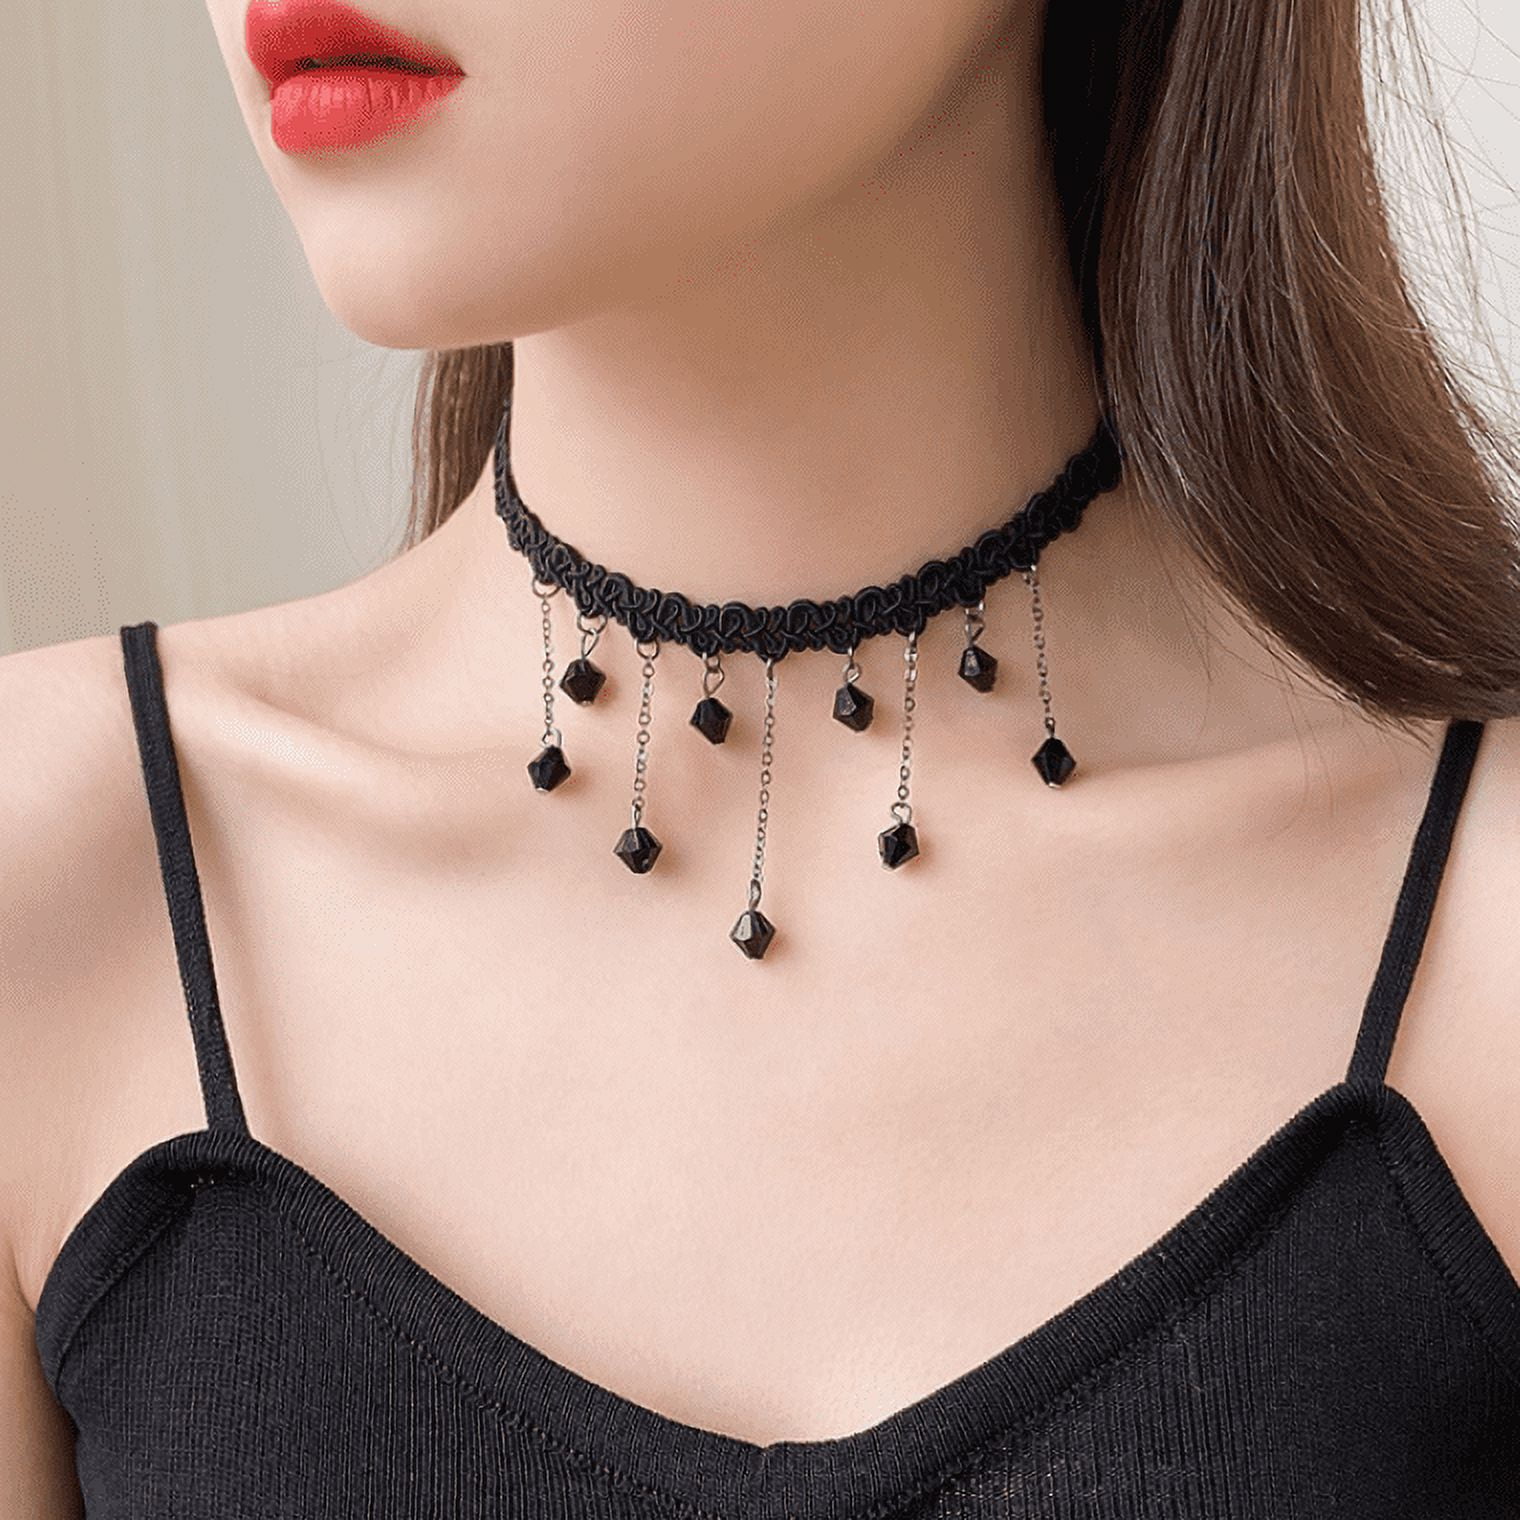 12 Pcs Flower Choker Black Necklace Set For Women Girls Stretch Elastic  Henna Tattoo Colorful Cloth Collar Necklace Multicolor Gothic Chokers